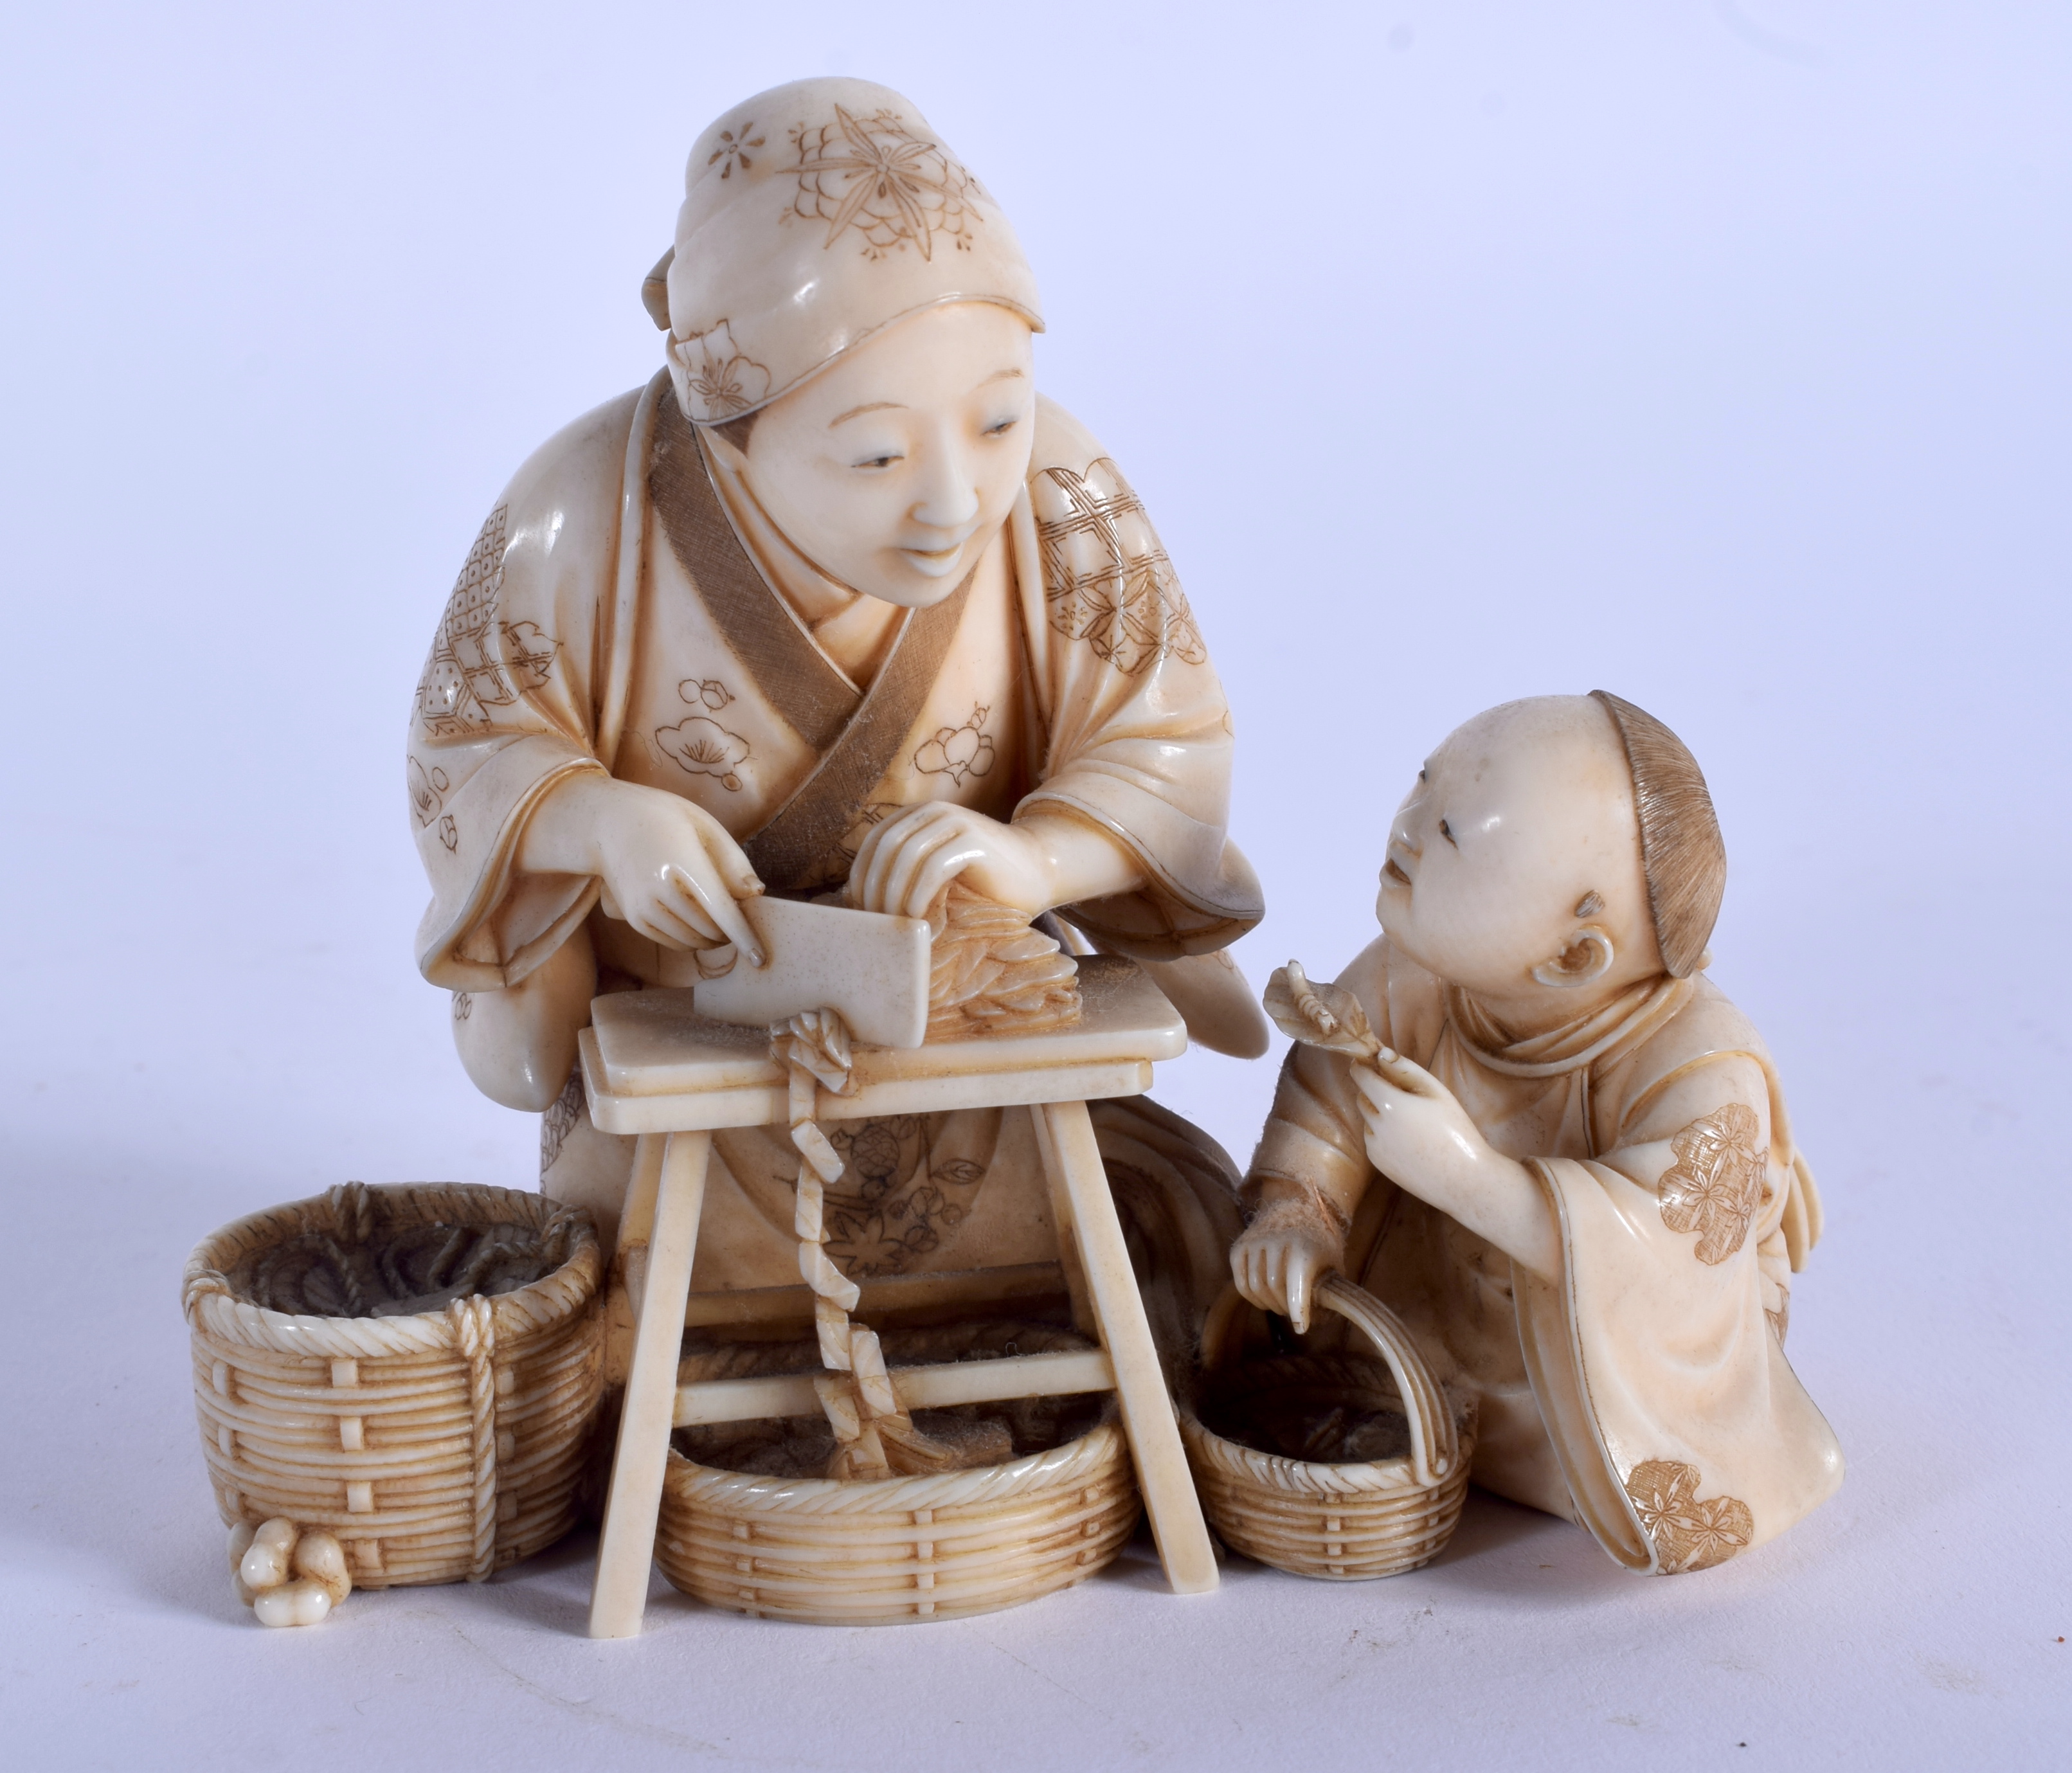 A FINE 19TH CENTURY JAPANESE MEIJI PERIOD CARVED IVORY OKIMONO modelled as a female and child prepar